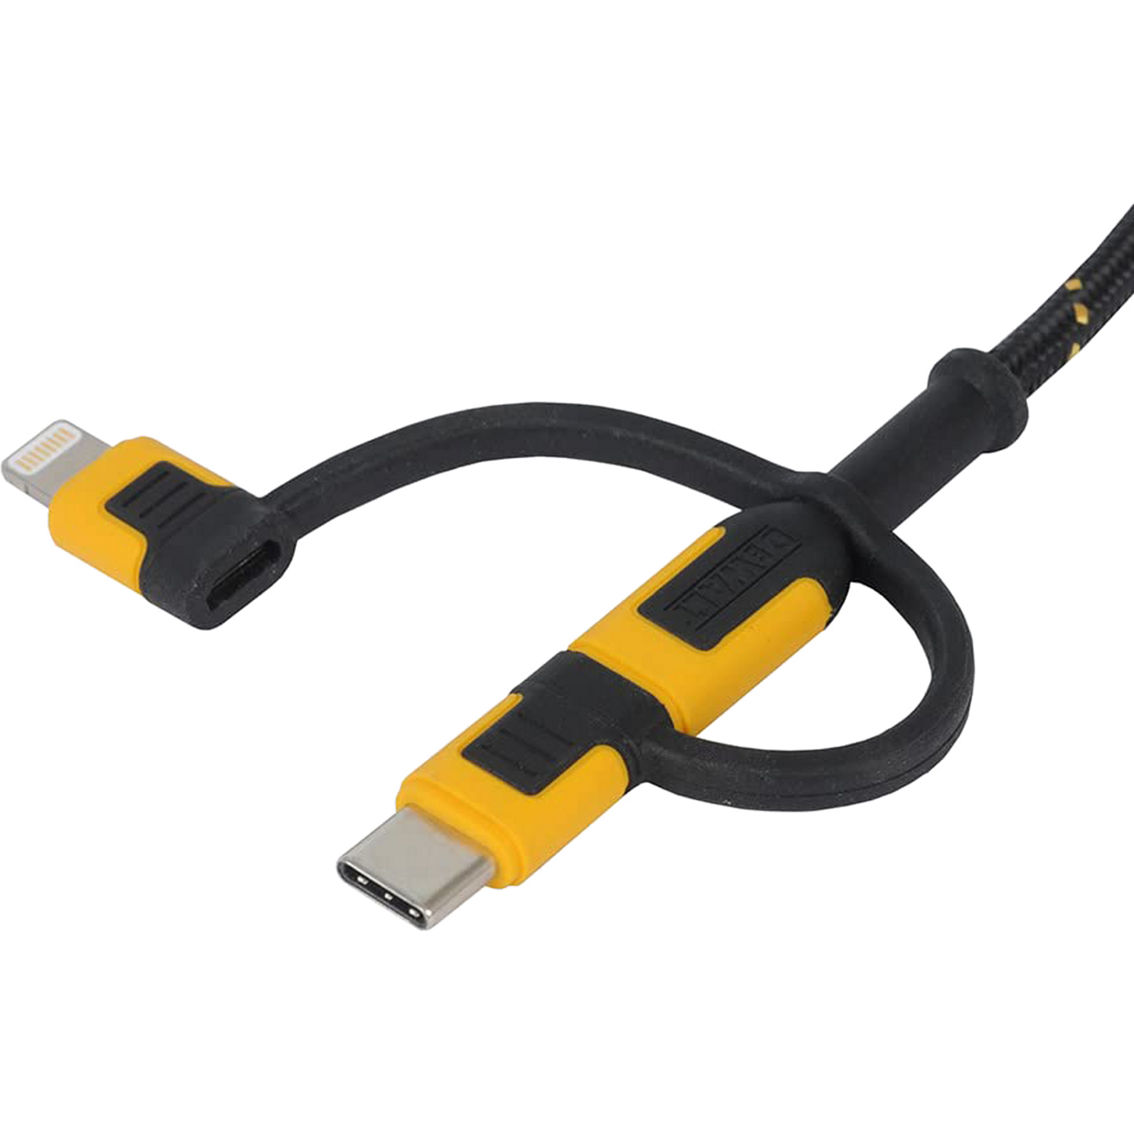 DeWalt Reinforced 3-in-1 Charging Cable for Lightning, Type C, and Micro-USB - Image 3 of 8